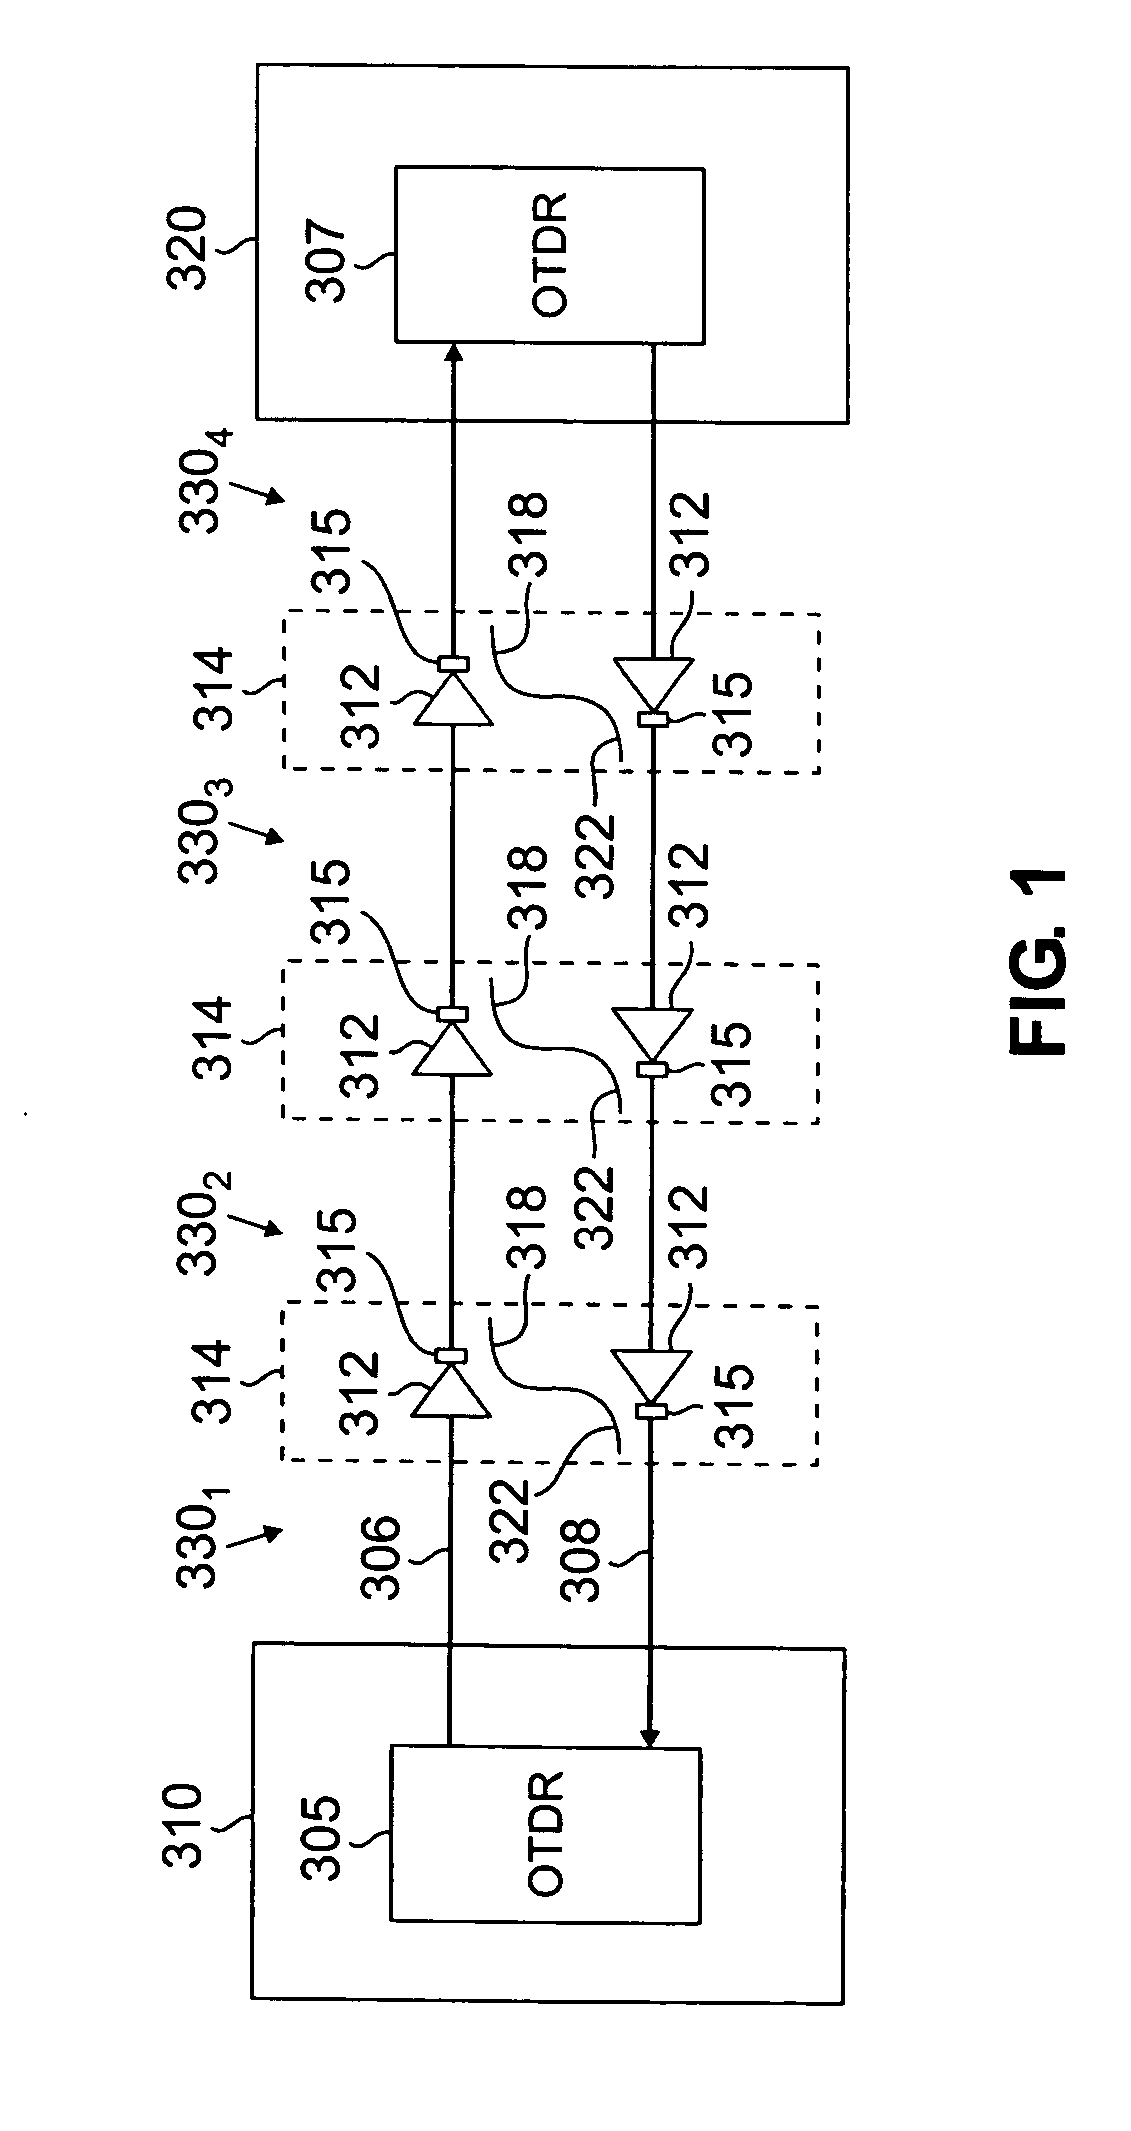 Cotdr arrangement with swept frequency pulse generator for an optical transmission system